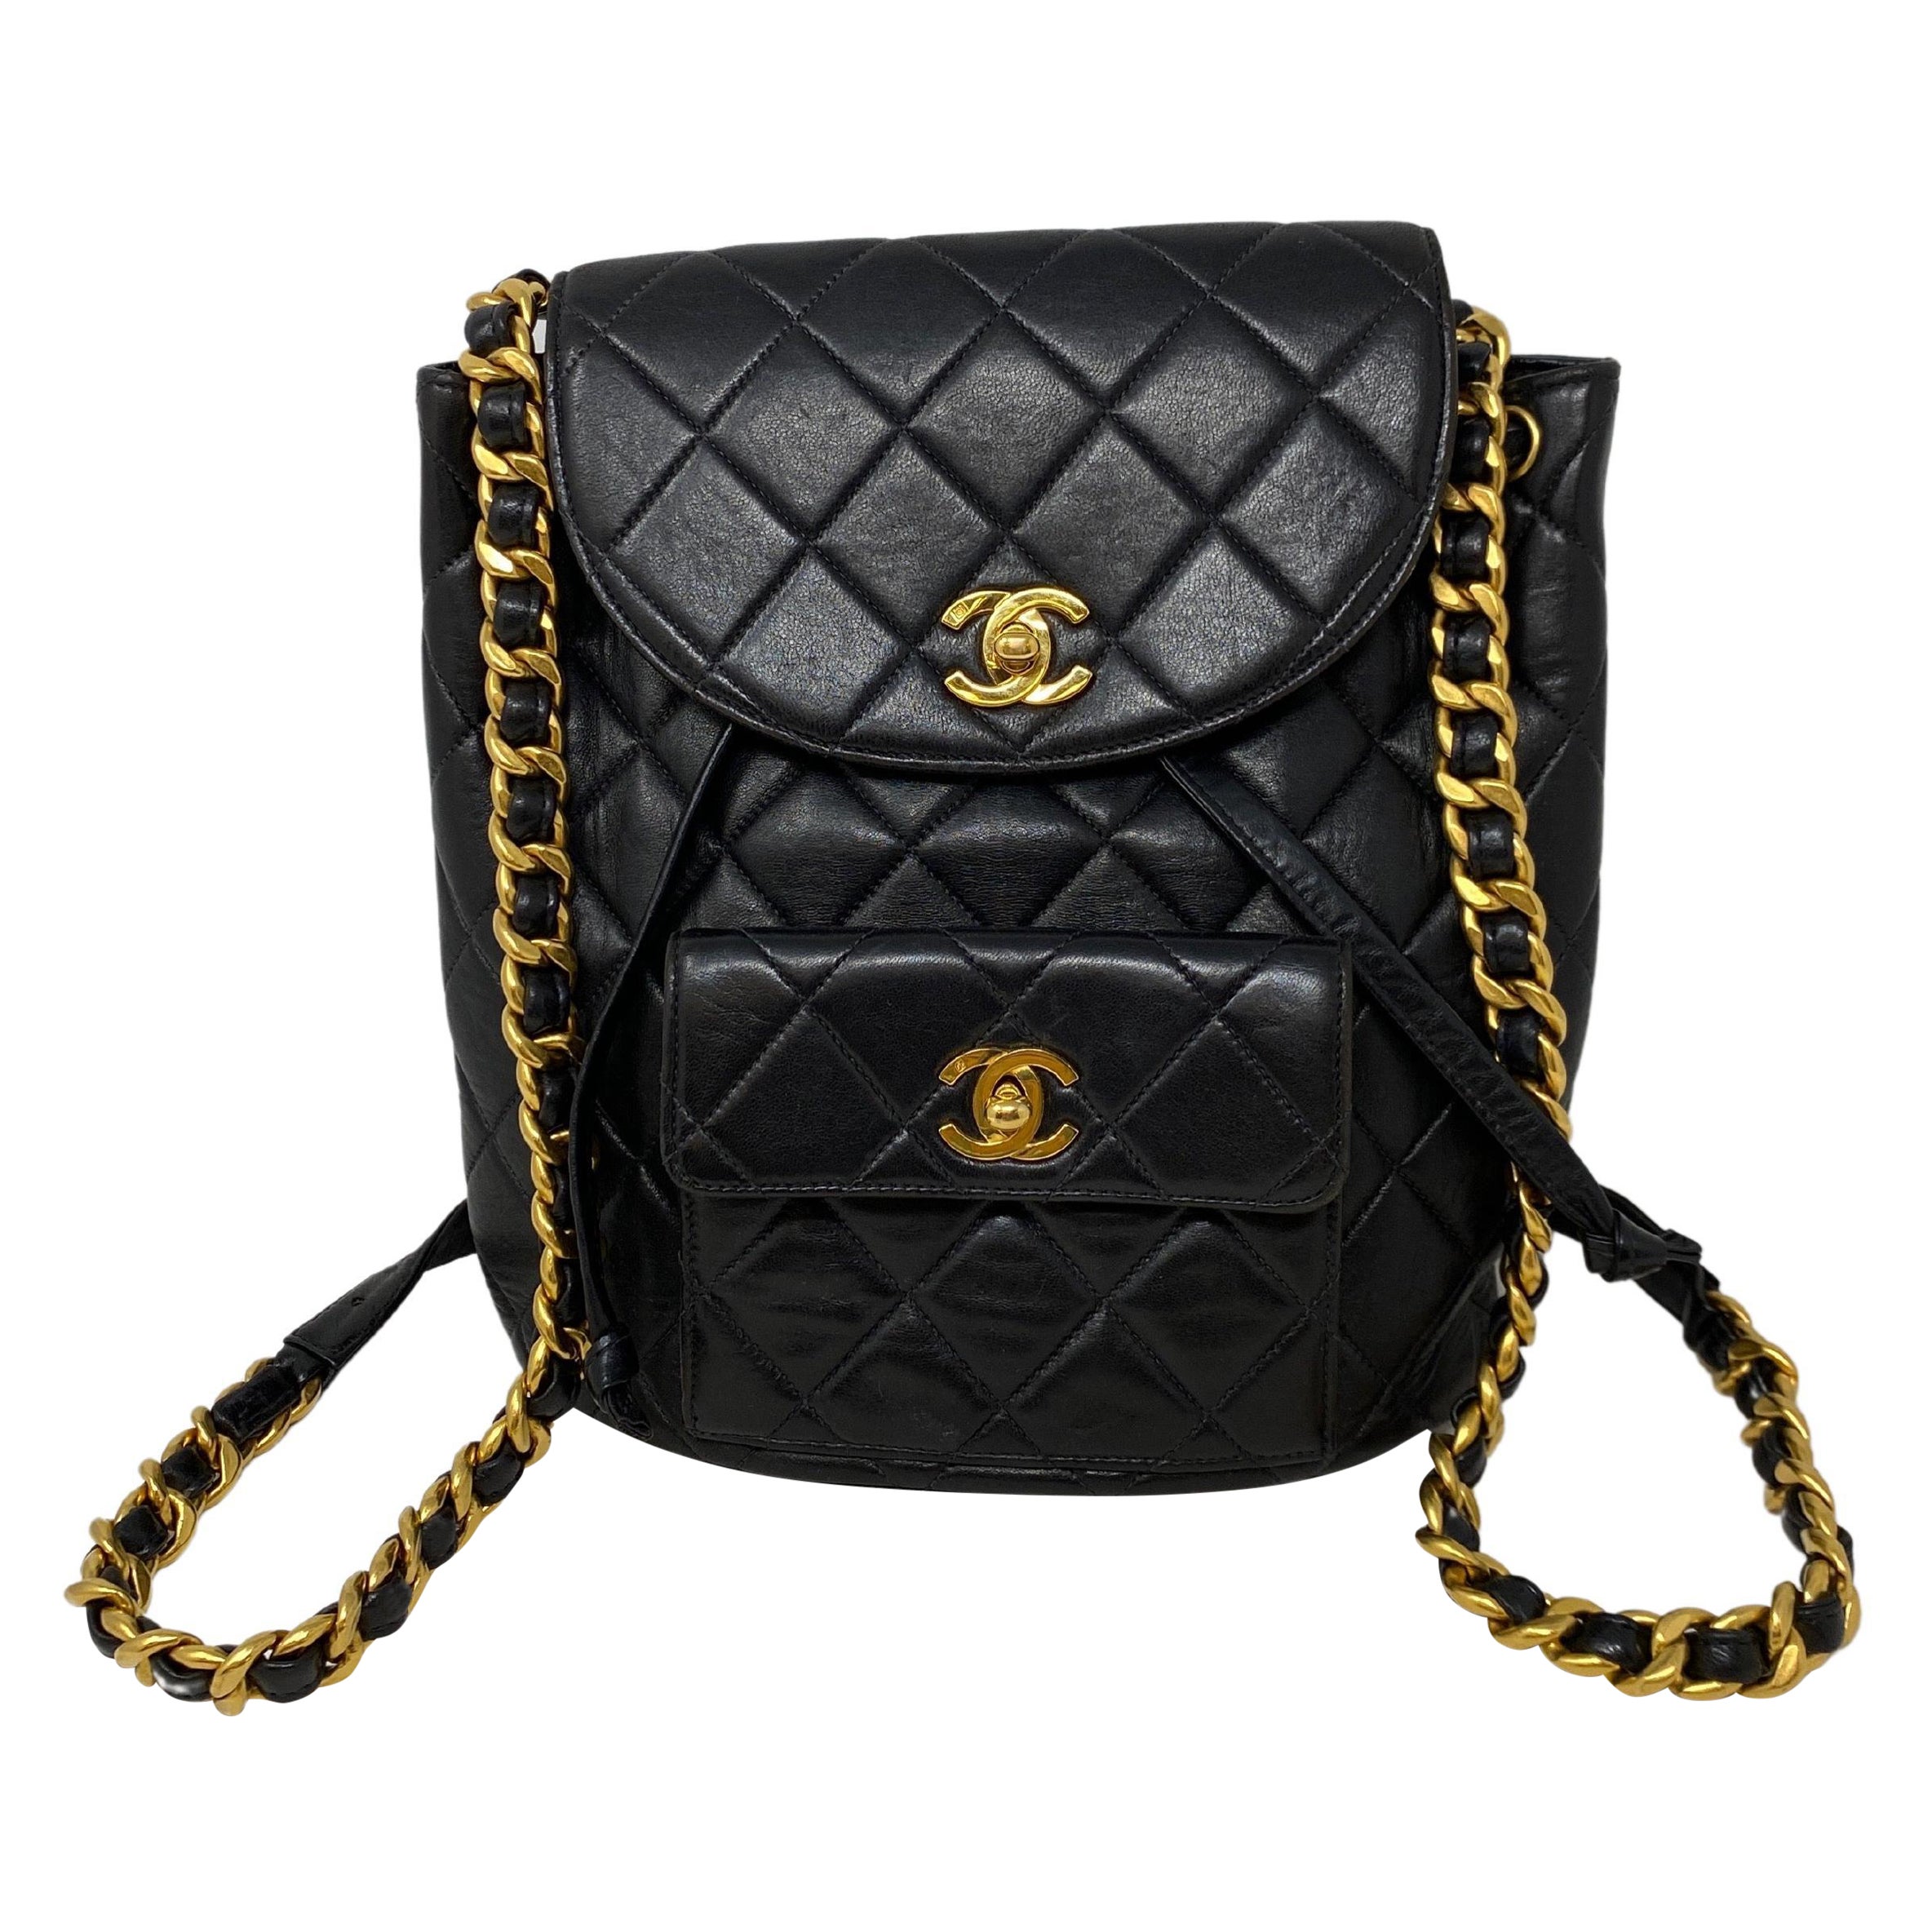 CHANEL black Quilted leather URBAN SPIRIT SMALL Backpack Bag For